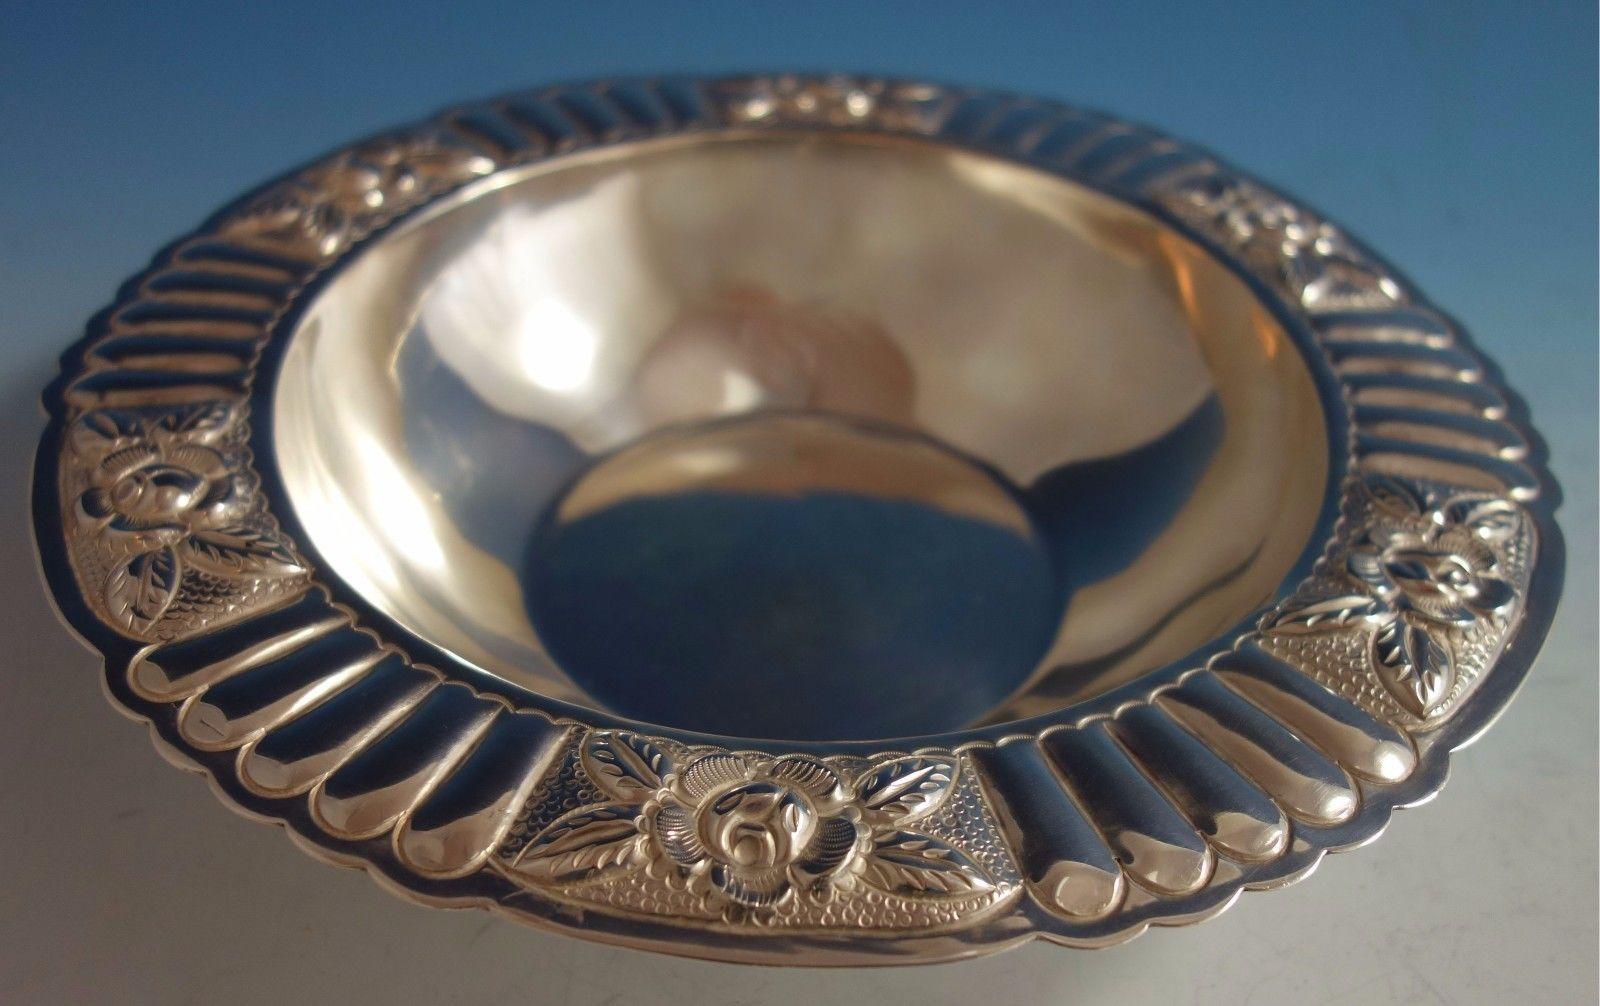 Aztec Rose by Maciel sterling silver fruit bowl. This bowl has a fluted/ruffled border. It is marked Maciel #5838-6 and weighs 13.4 ozt. This piece measures 1 3/4 tall and 9 3/4 diameter. It is not monogrammed and is in excellent condition.